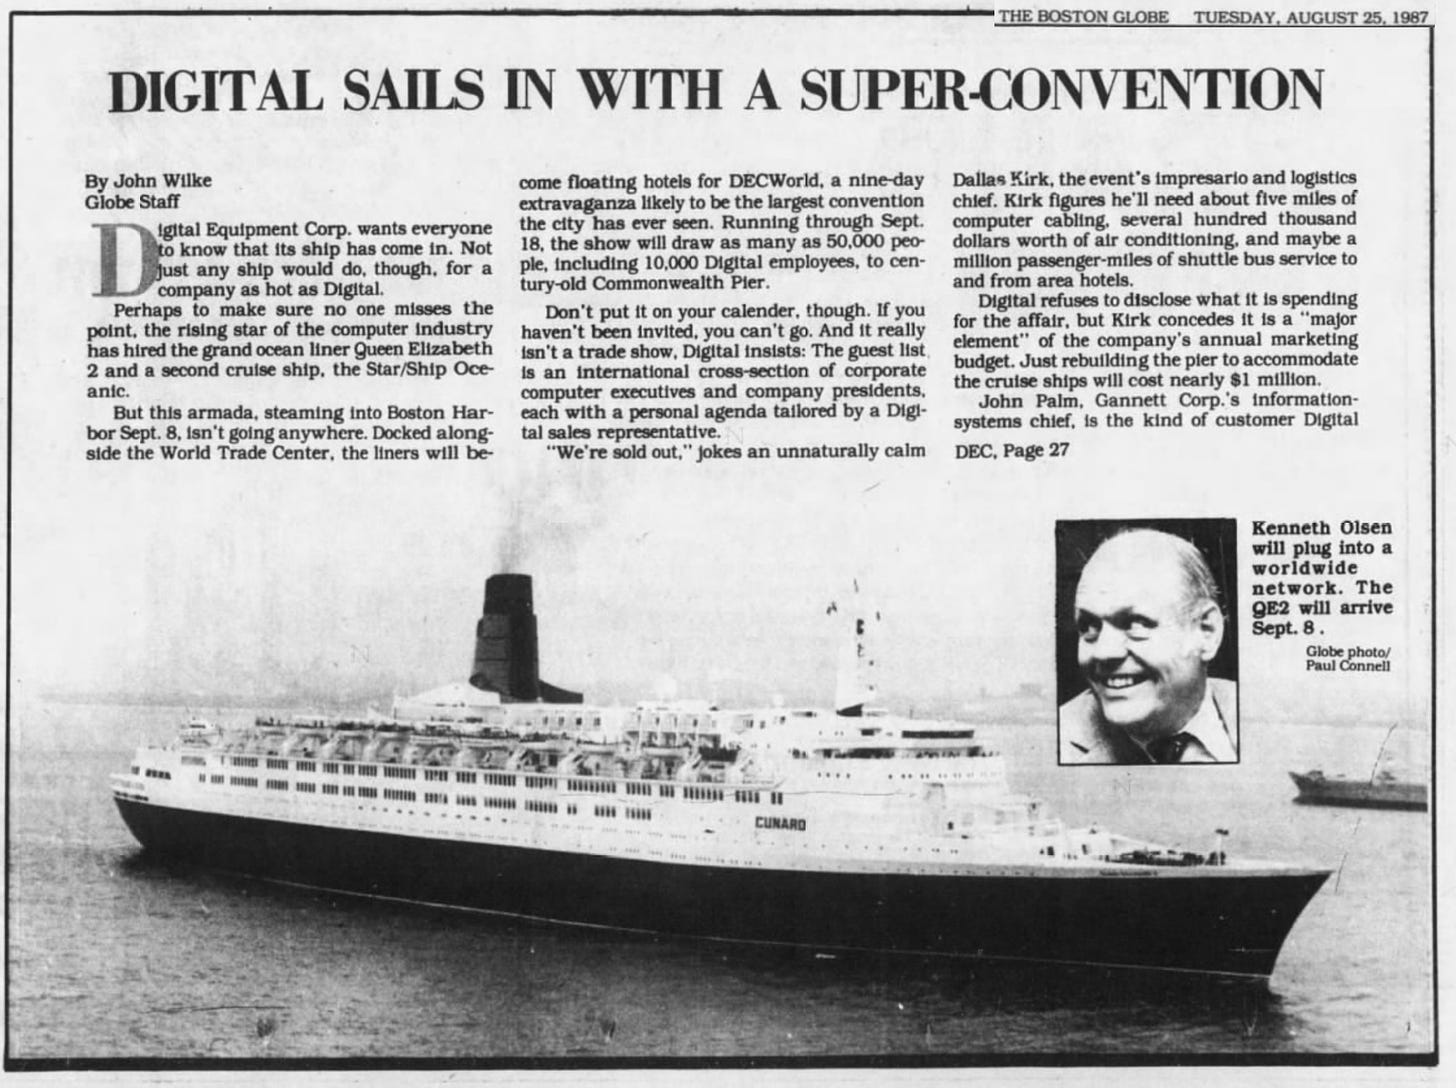 Digital Sails in with a Super-Conference newspaper story. There is an image of the Queen Elizabeth 2 ocean liner parked in Boston Harbor being used as a hotel room and conference center for overflow.